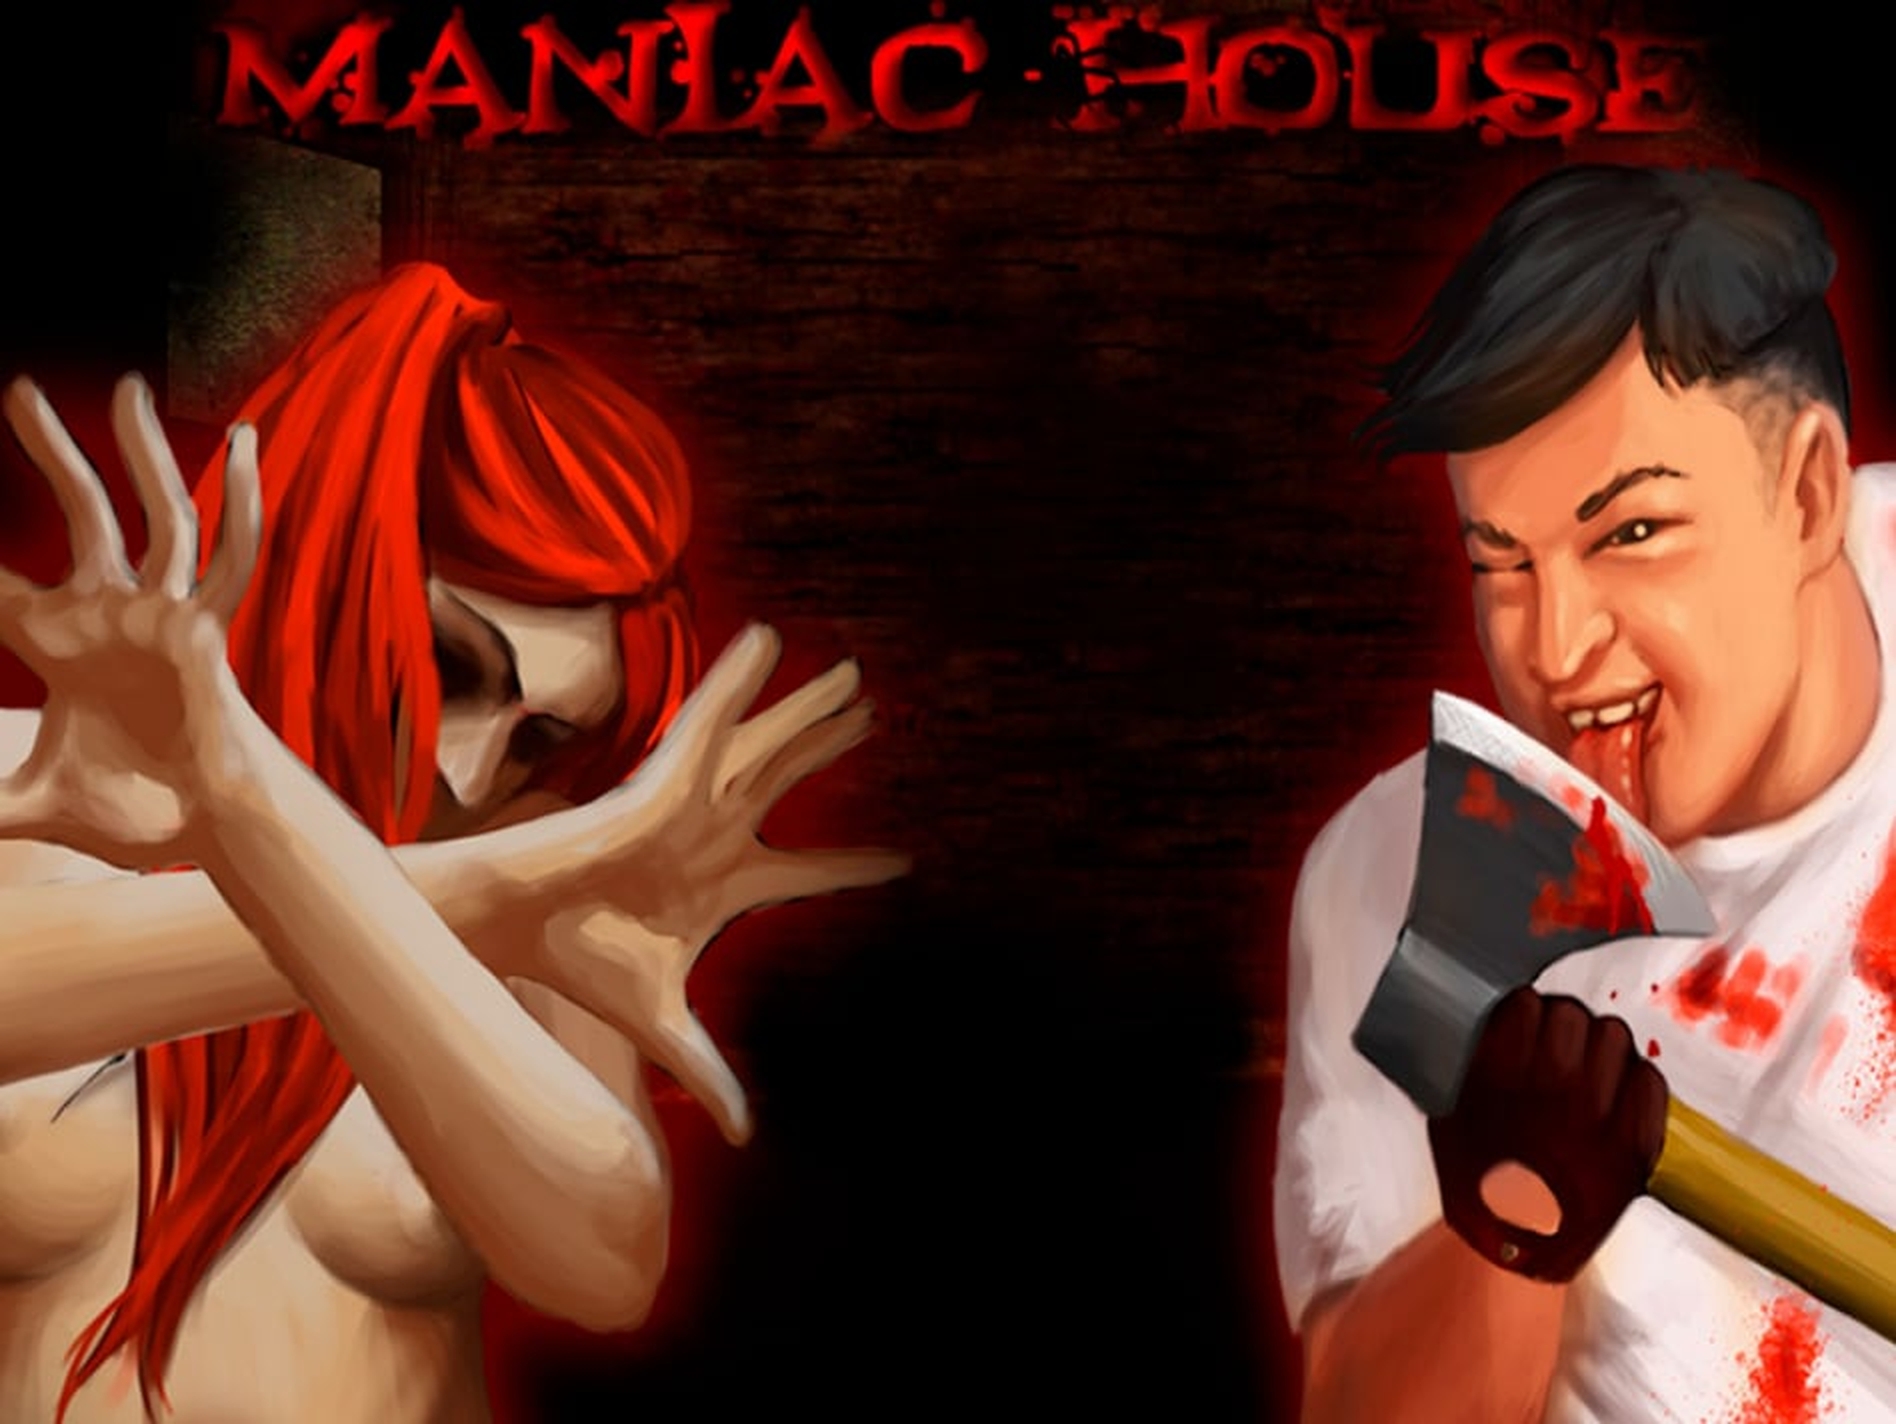 The Maniac House Online Slot Demo Game by Fugaso